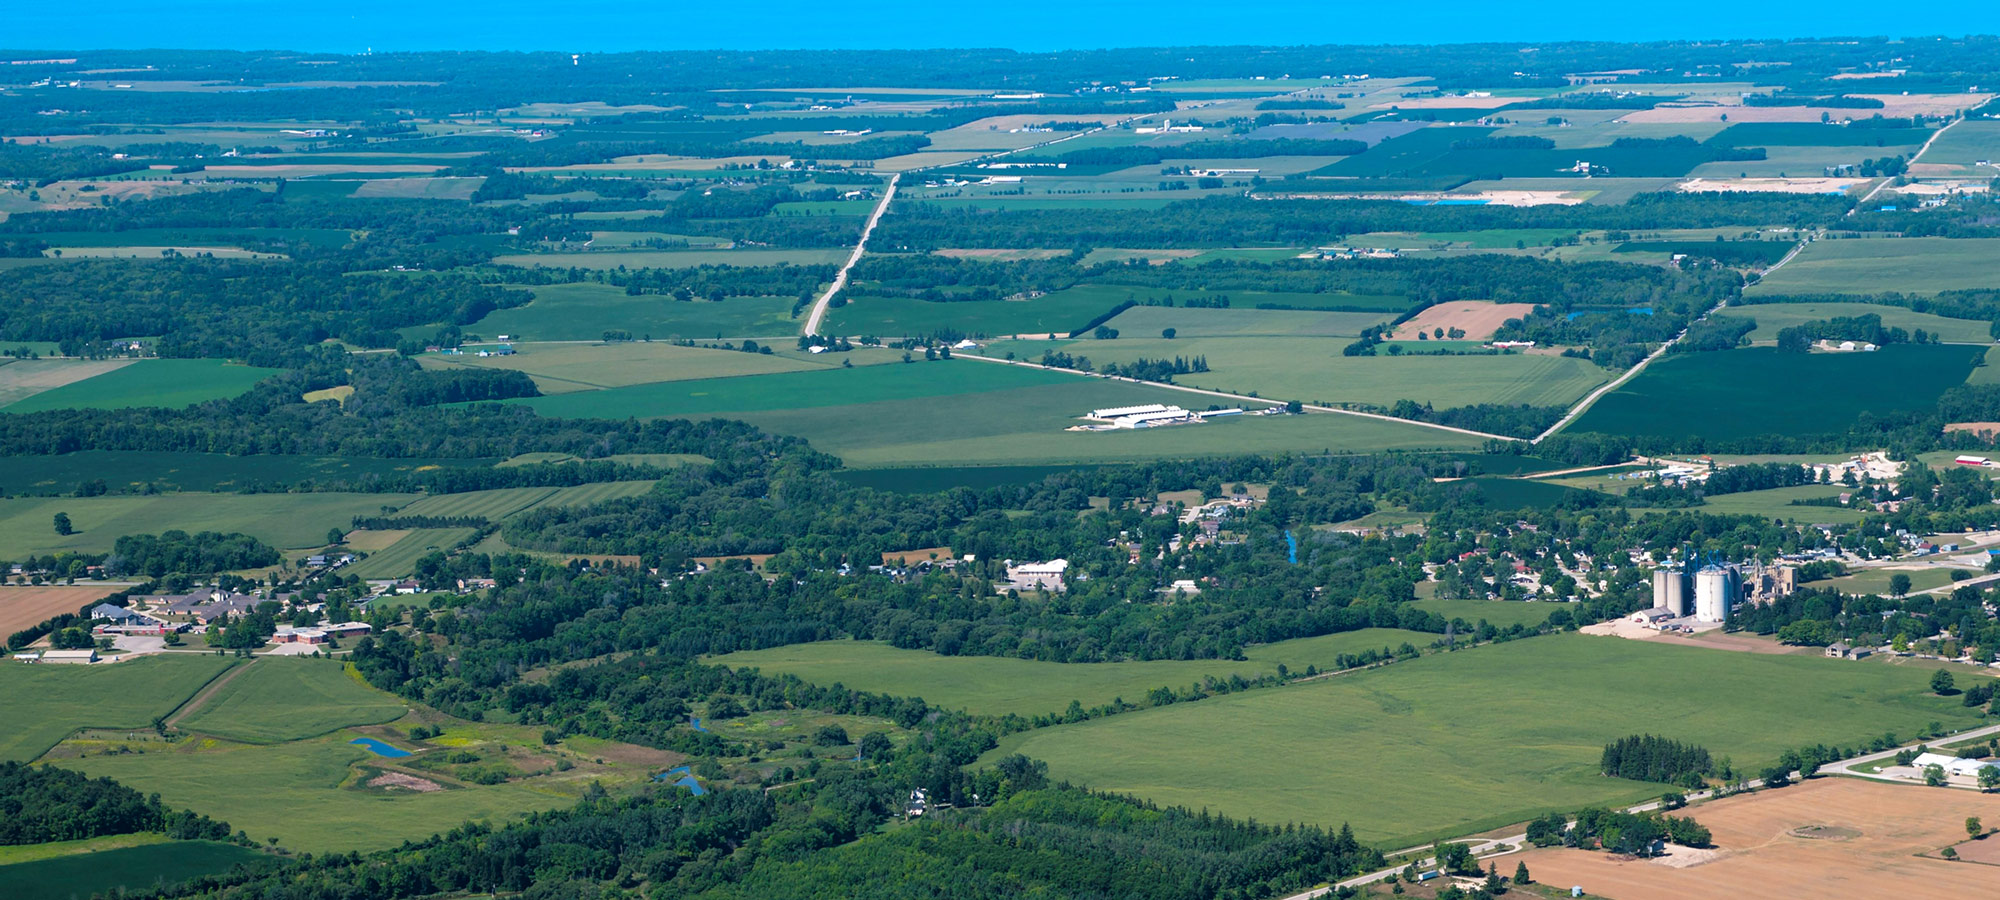 Aerial view of part of the region